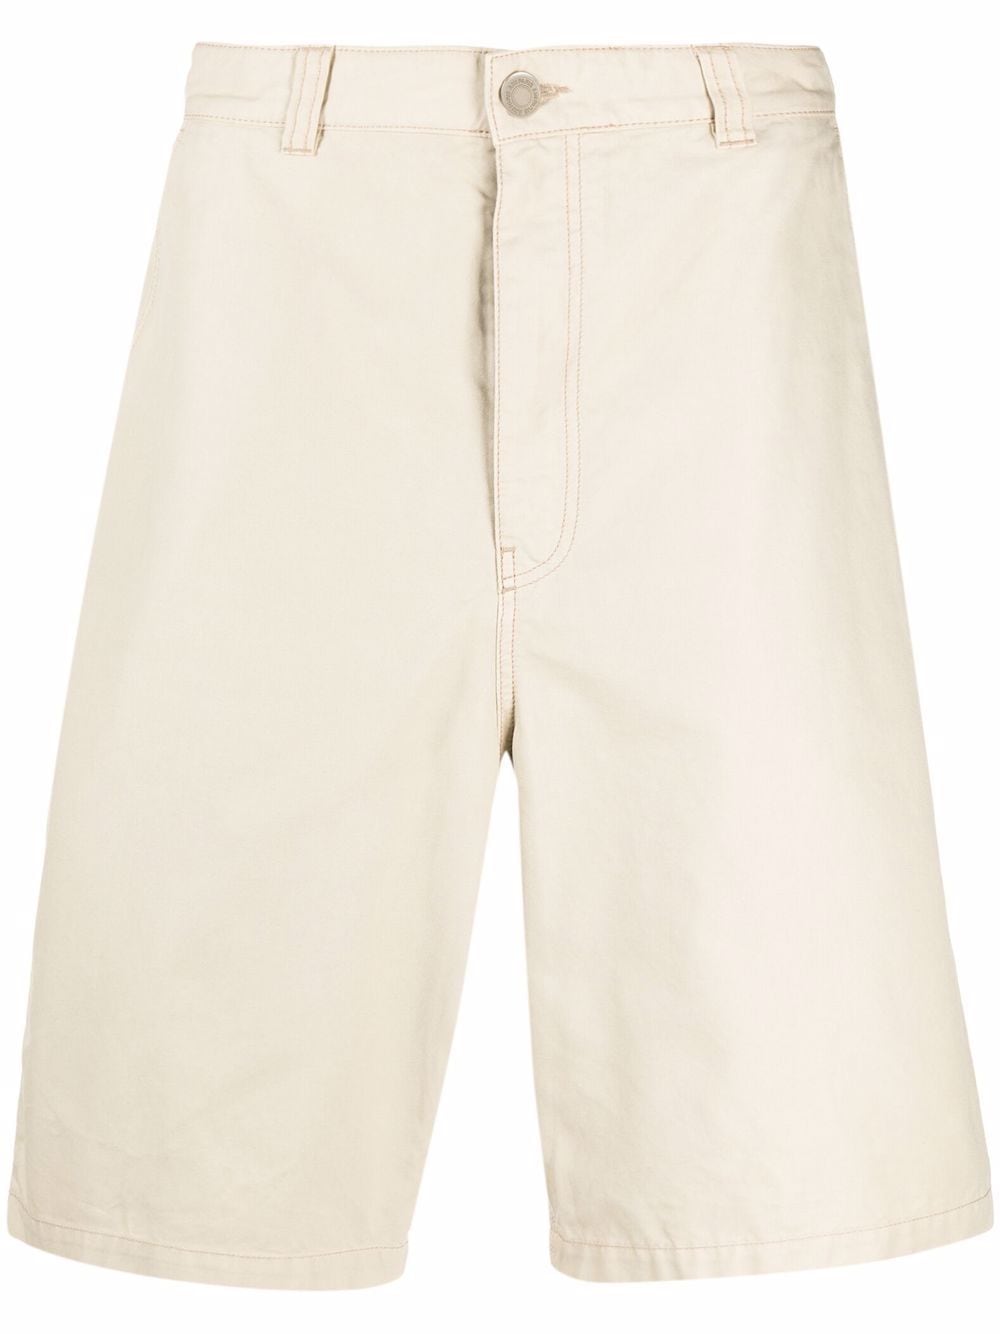 Men's AMI Paris Shorts - Best Deals You Need To See